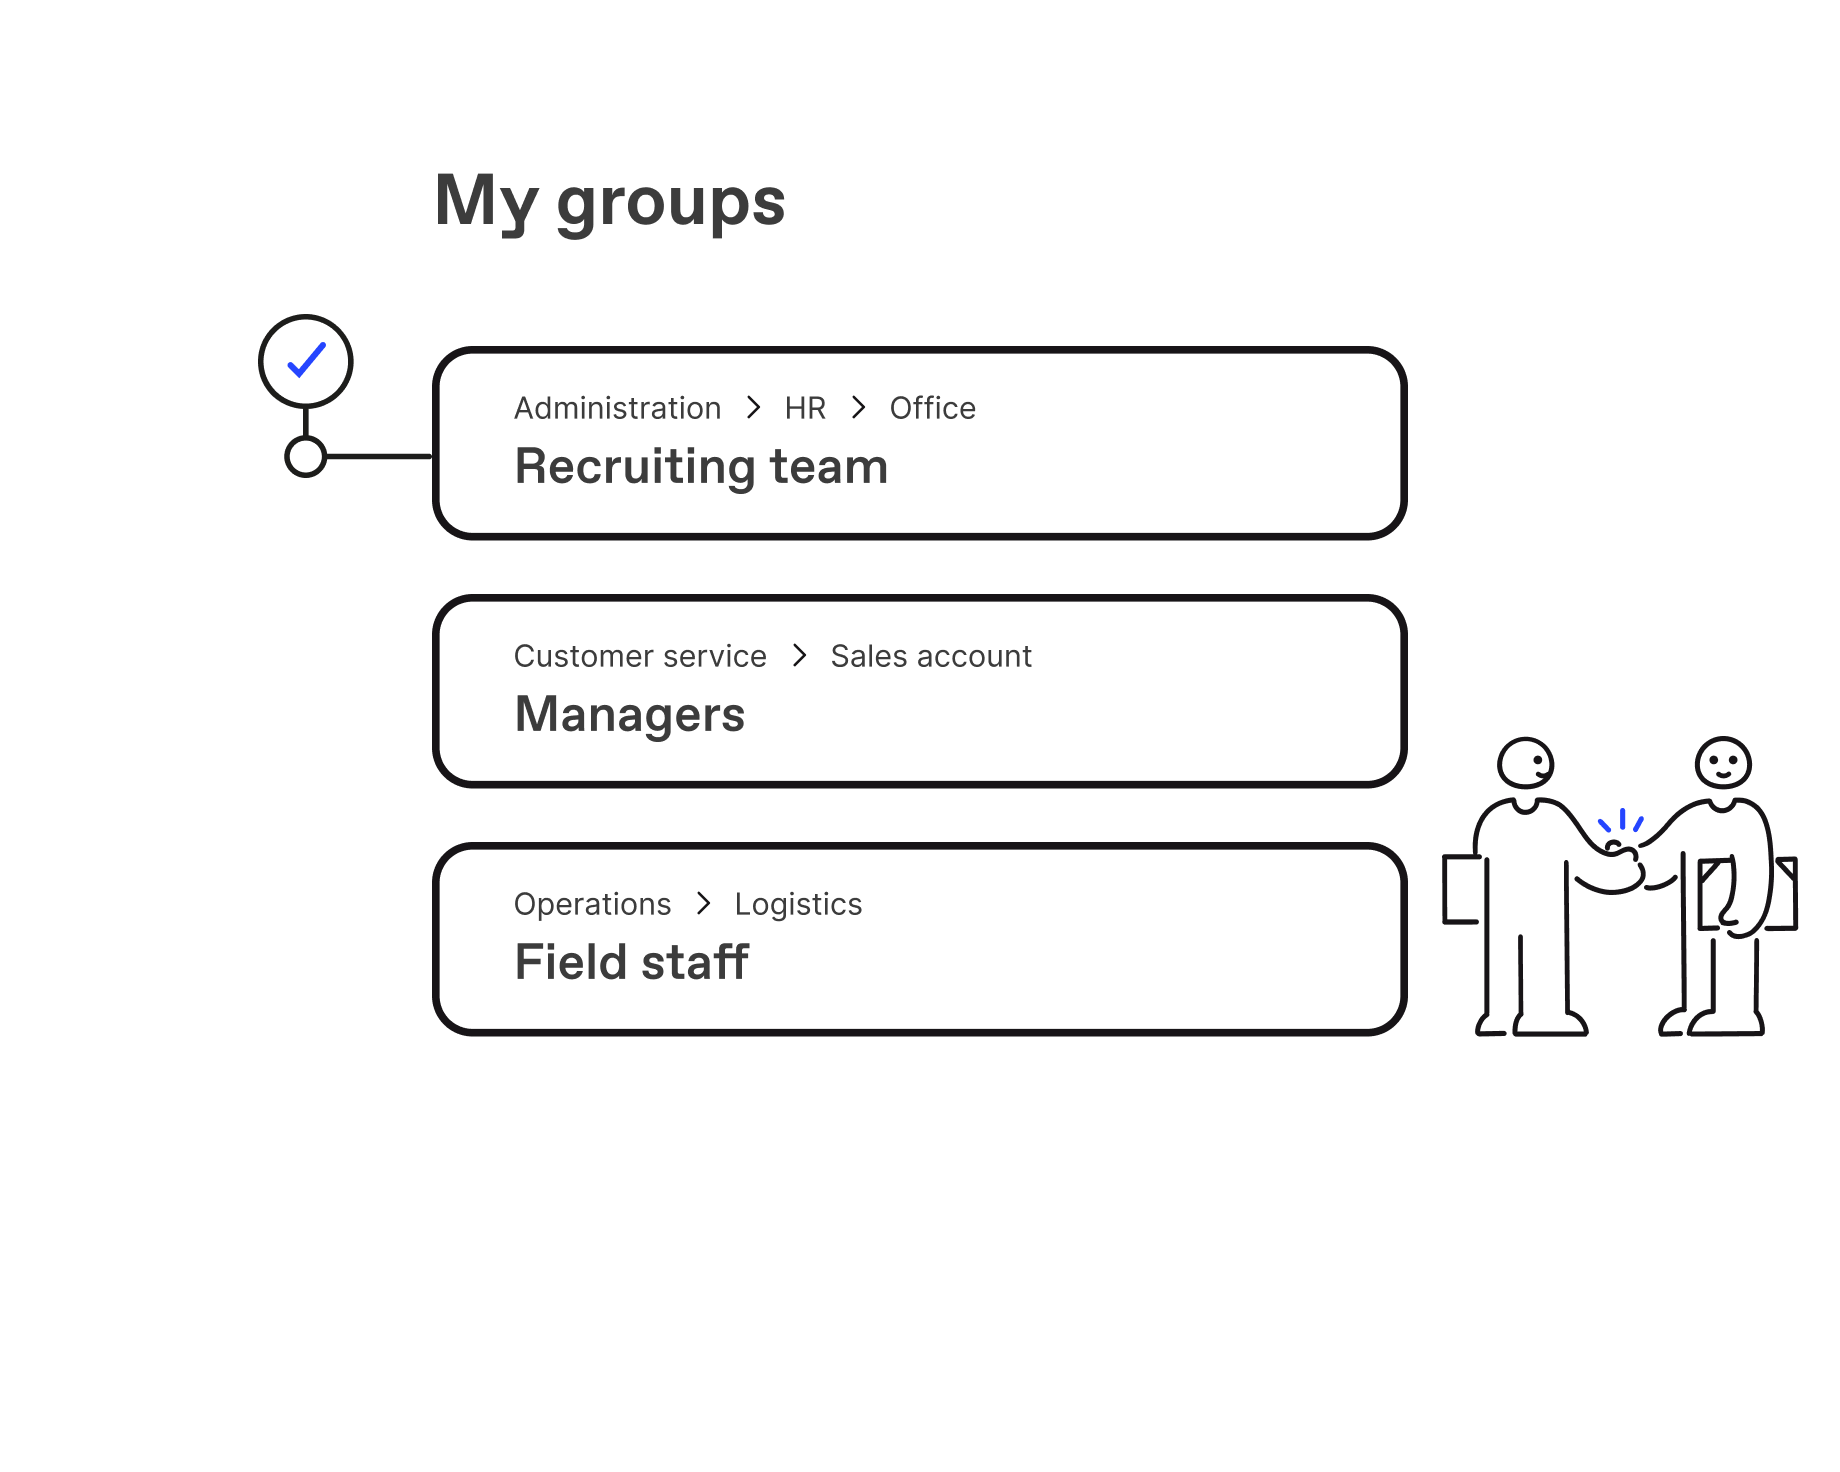 Group supervisor's overview of their assigned user groups ("My groups") in Workleap LMS.